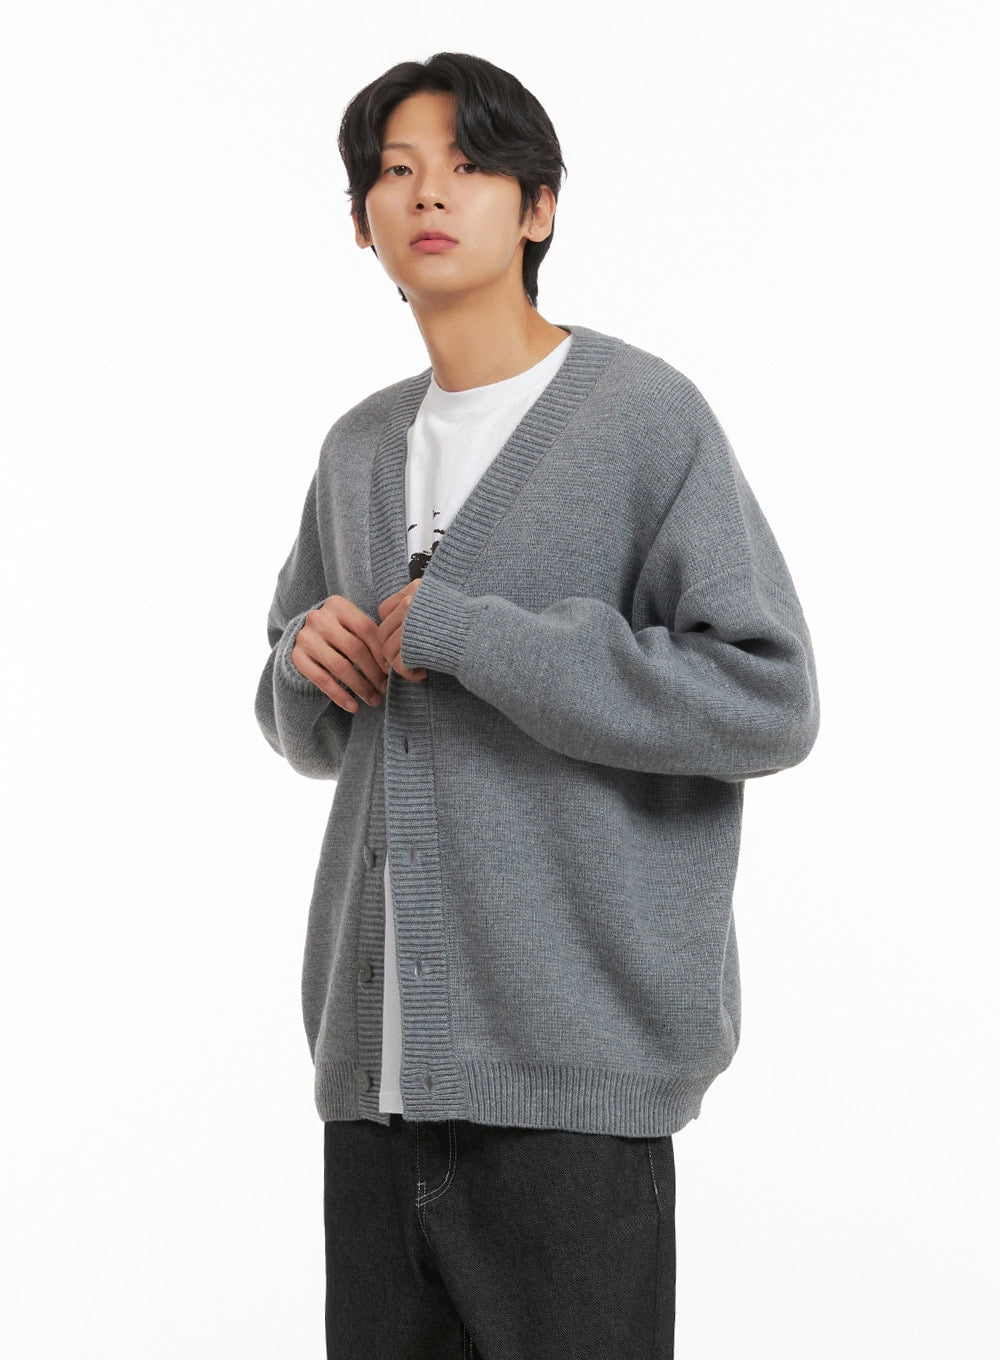 mens-oversized-buttoned-cardigan-gray-iy416 / Gray